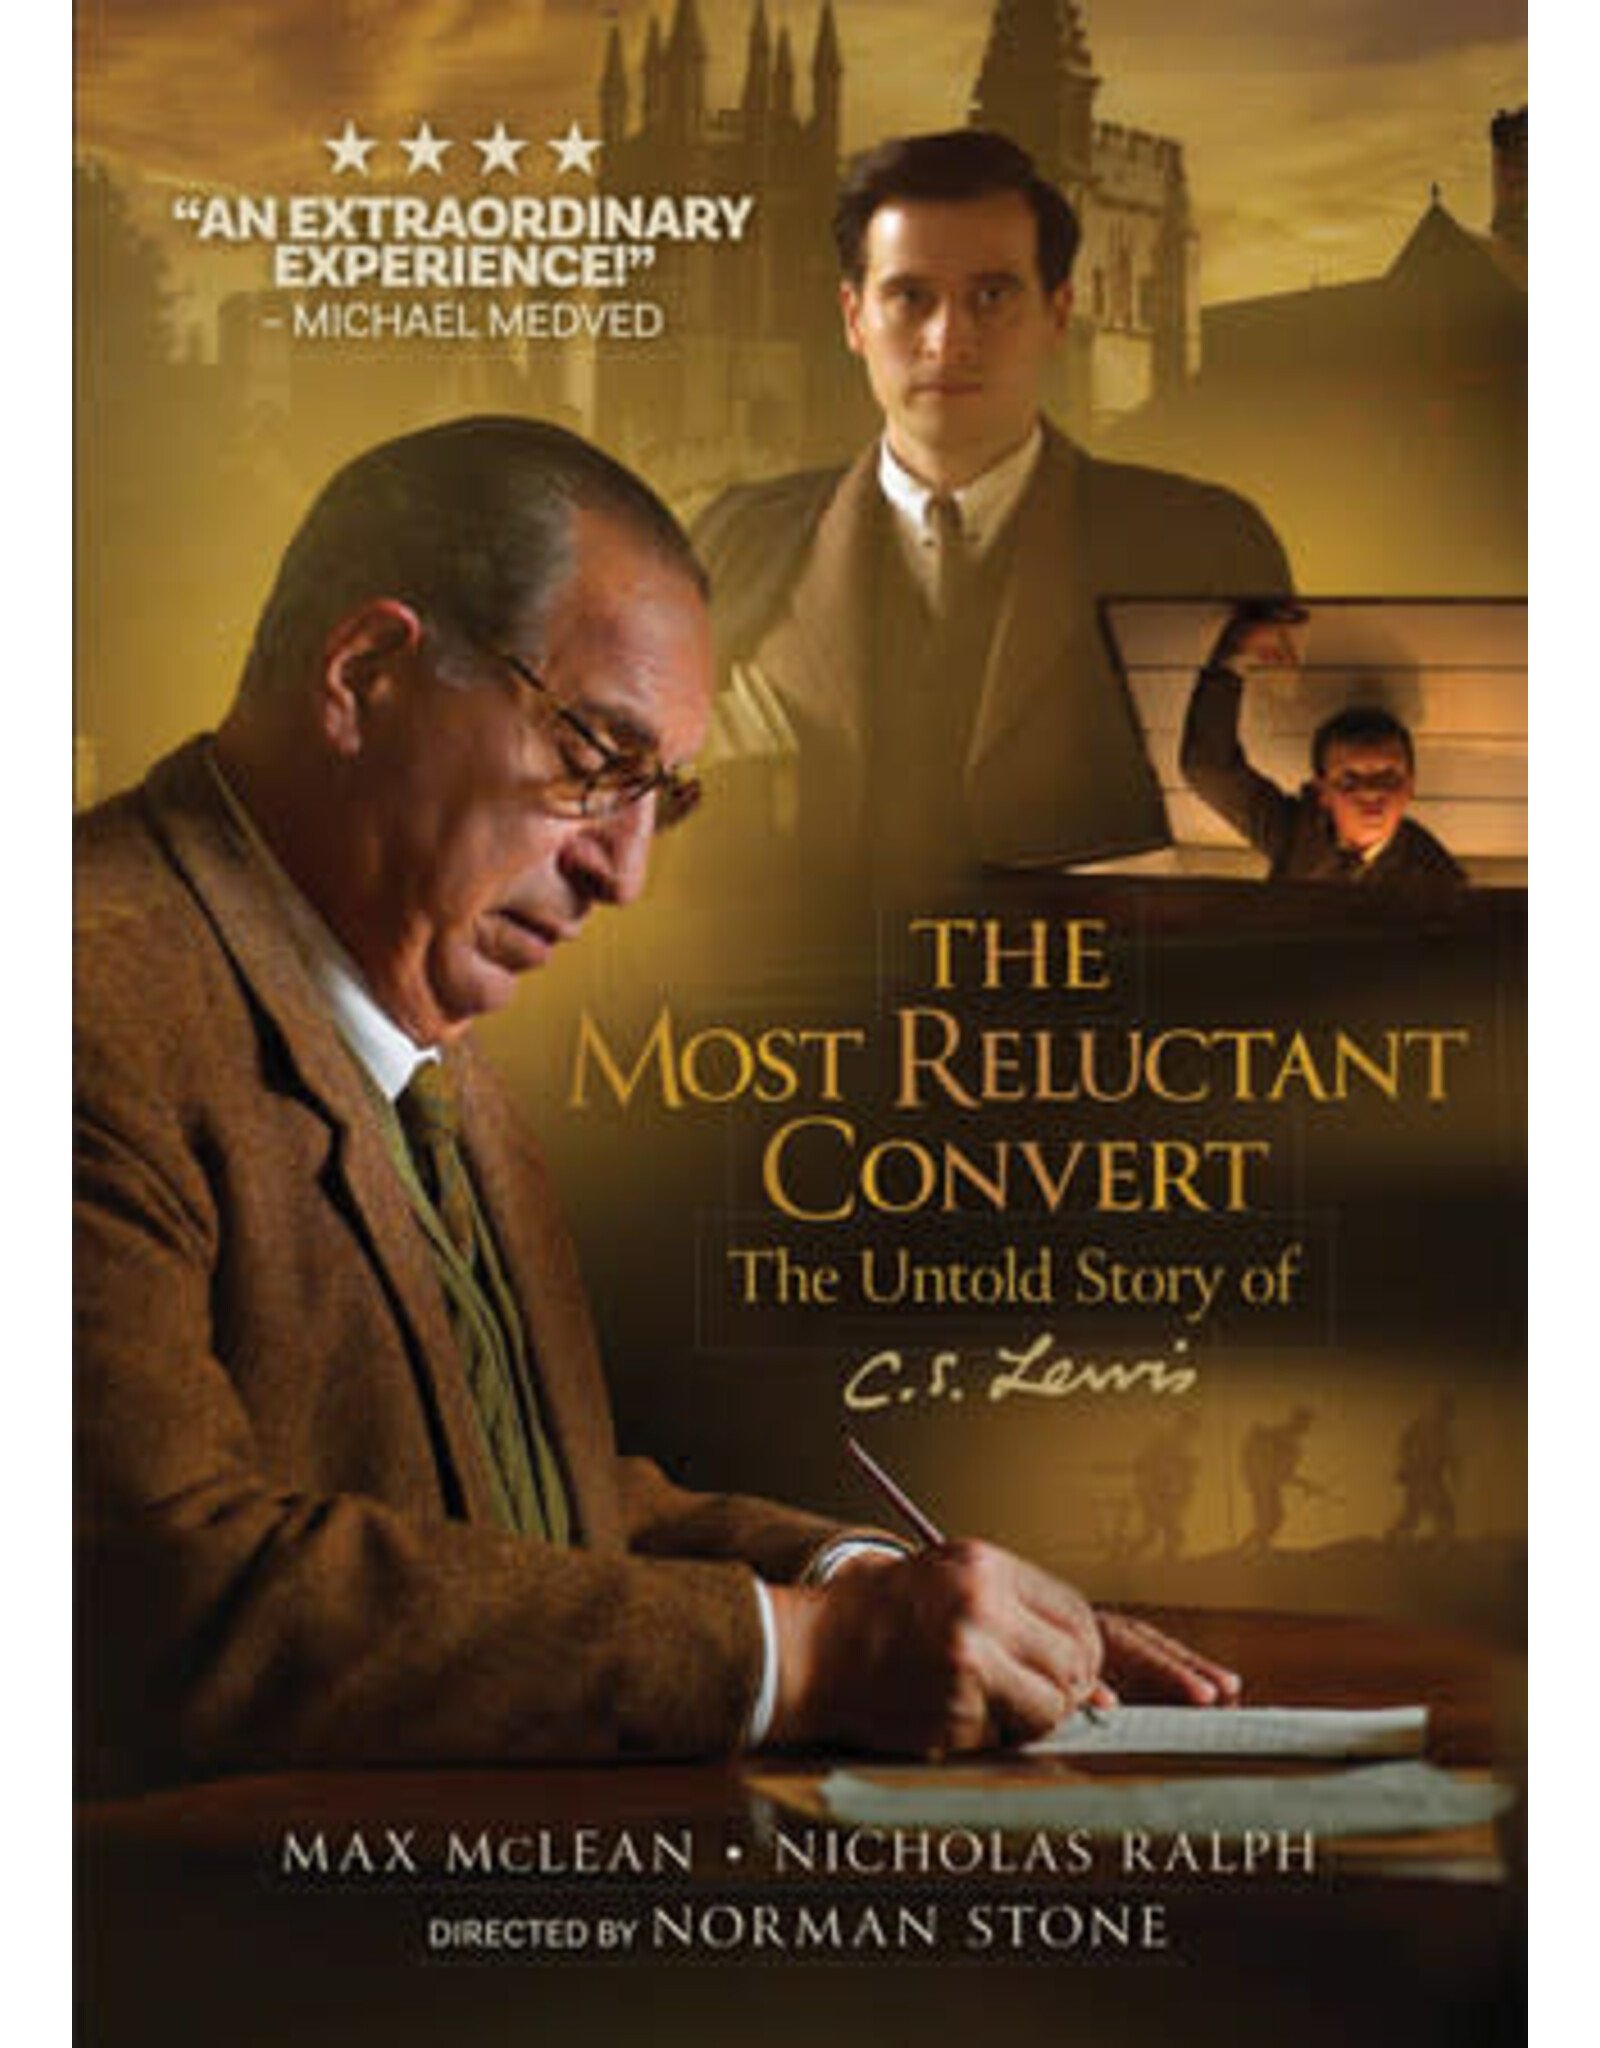 Ignatius Press The Most Reluctant Convert: Untold Story of C.S. Lewis DVD